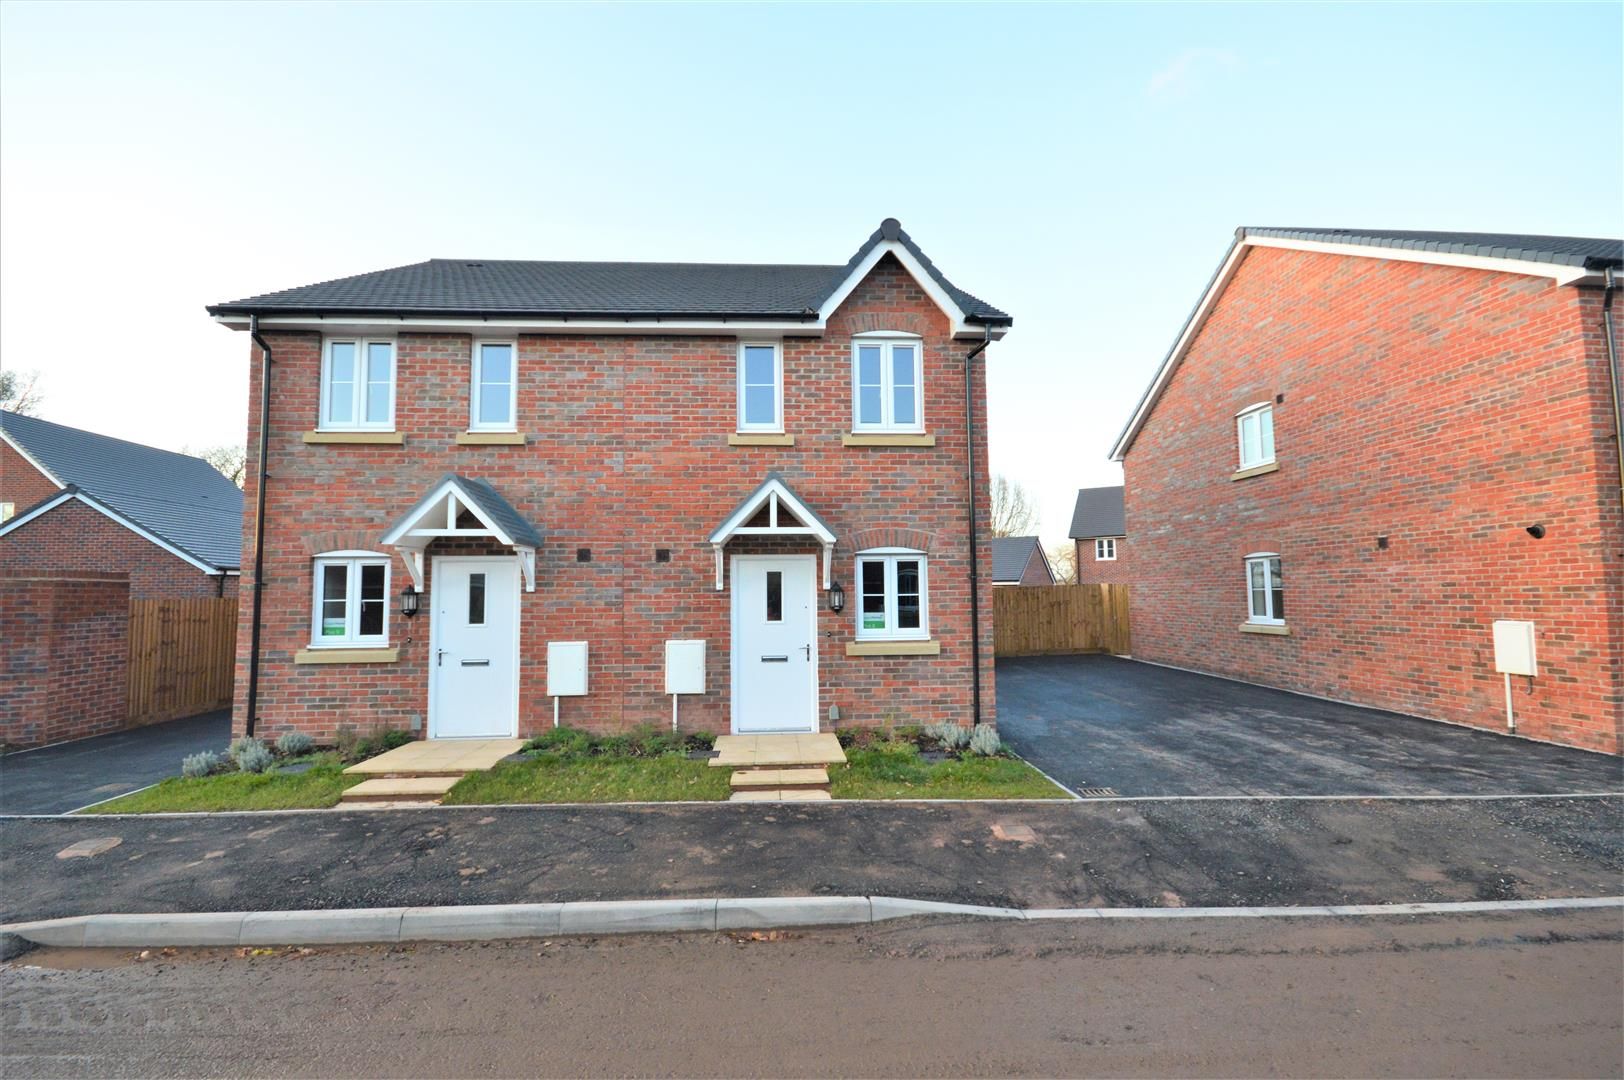 2 bed semi-detached for sale in Kingstone - Property Image 1